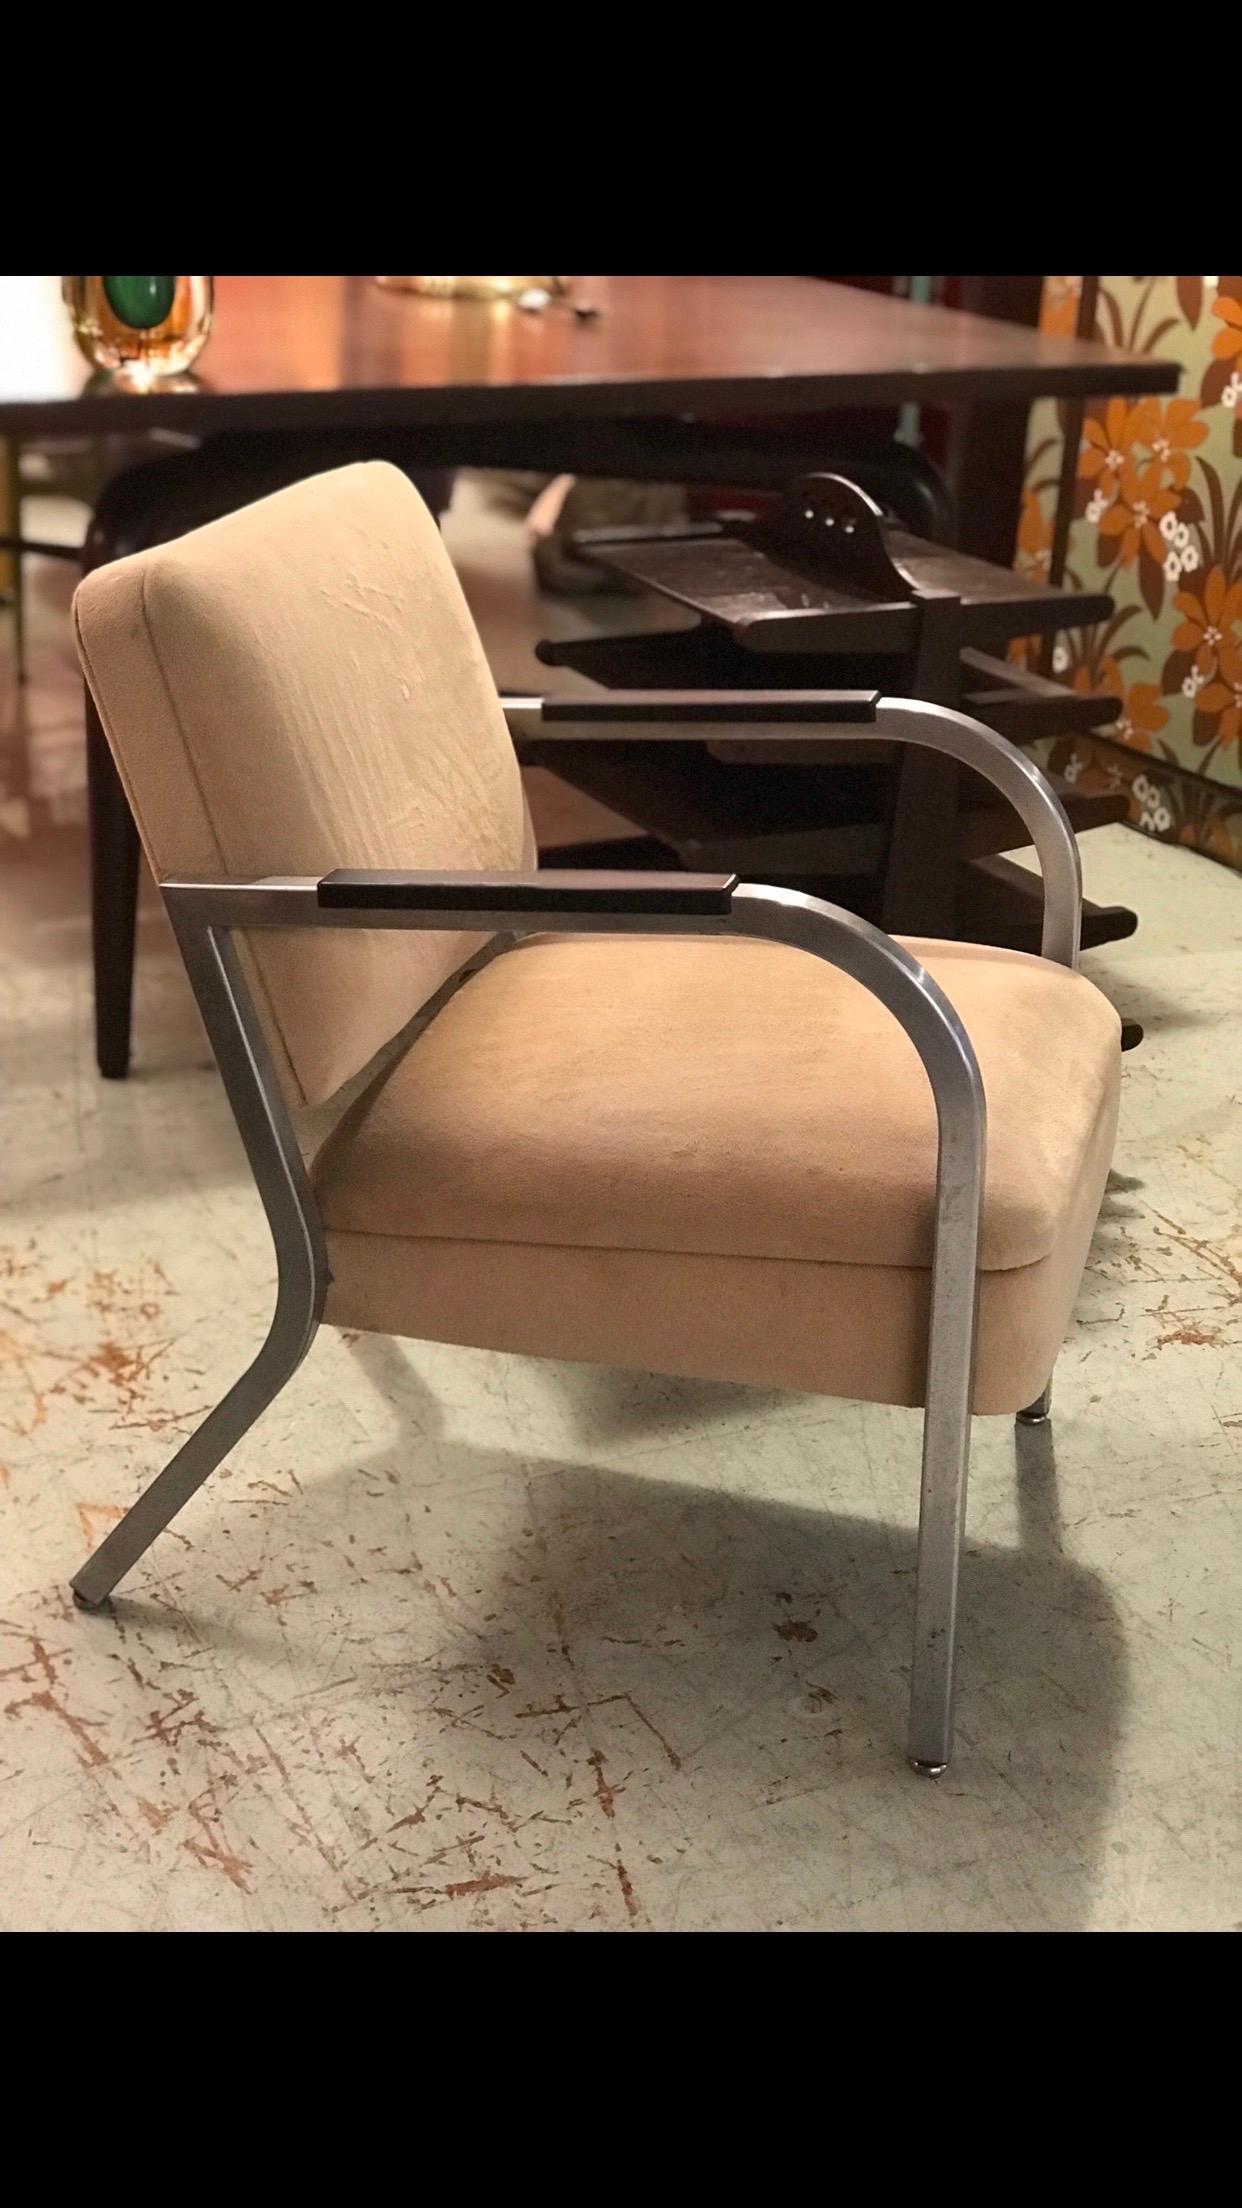 Mid-20th Century A Pair of Petite Square Tubing 1960's Club Chairs IMO Shaw Walker or Goodform,  